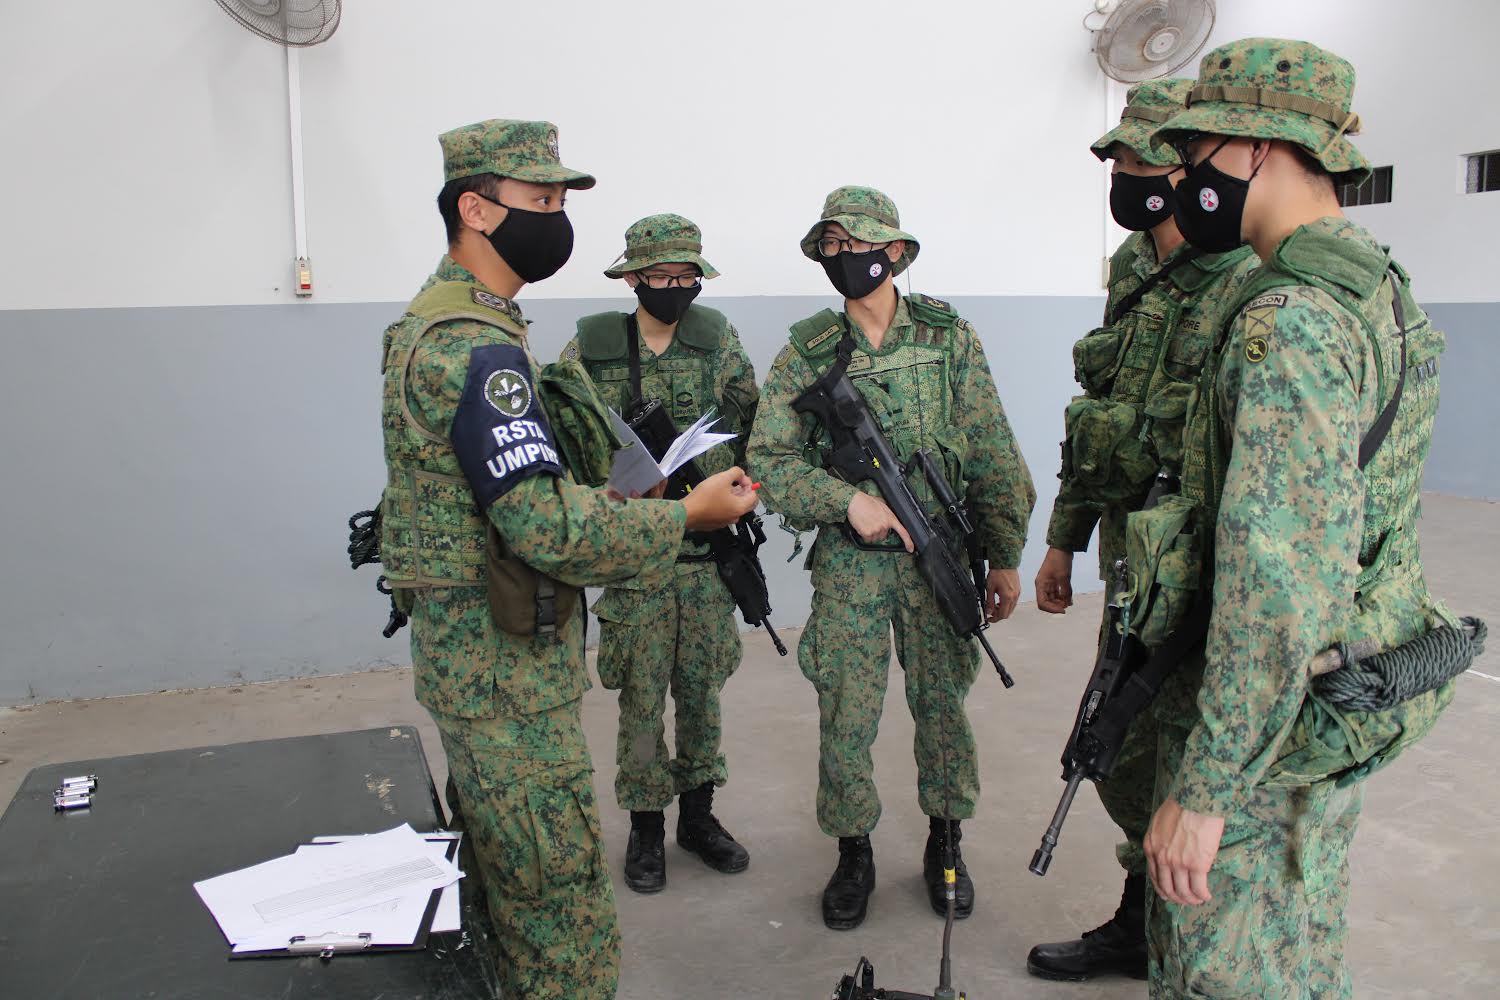 SSG Chia Bing Hong briefing his trainees on the training procedures.